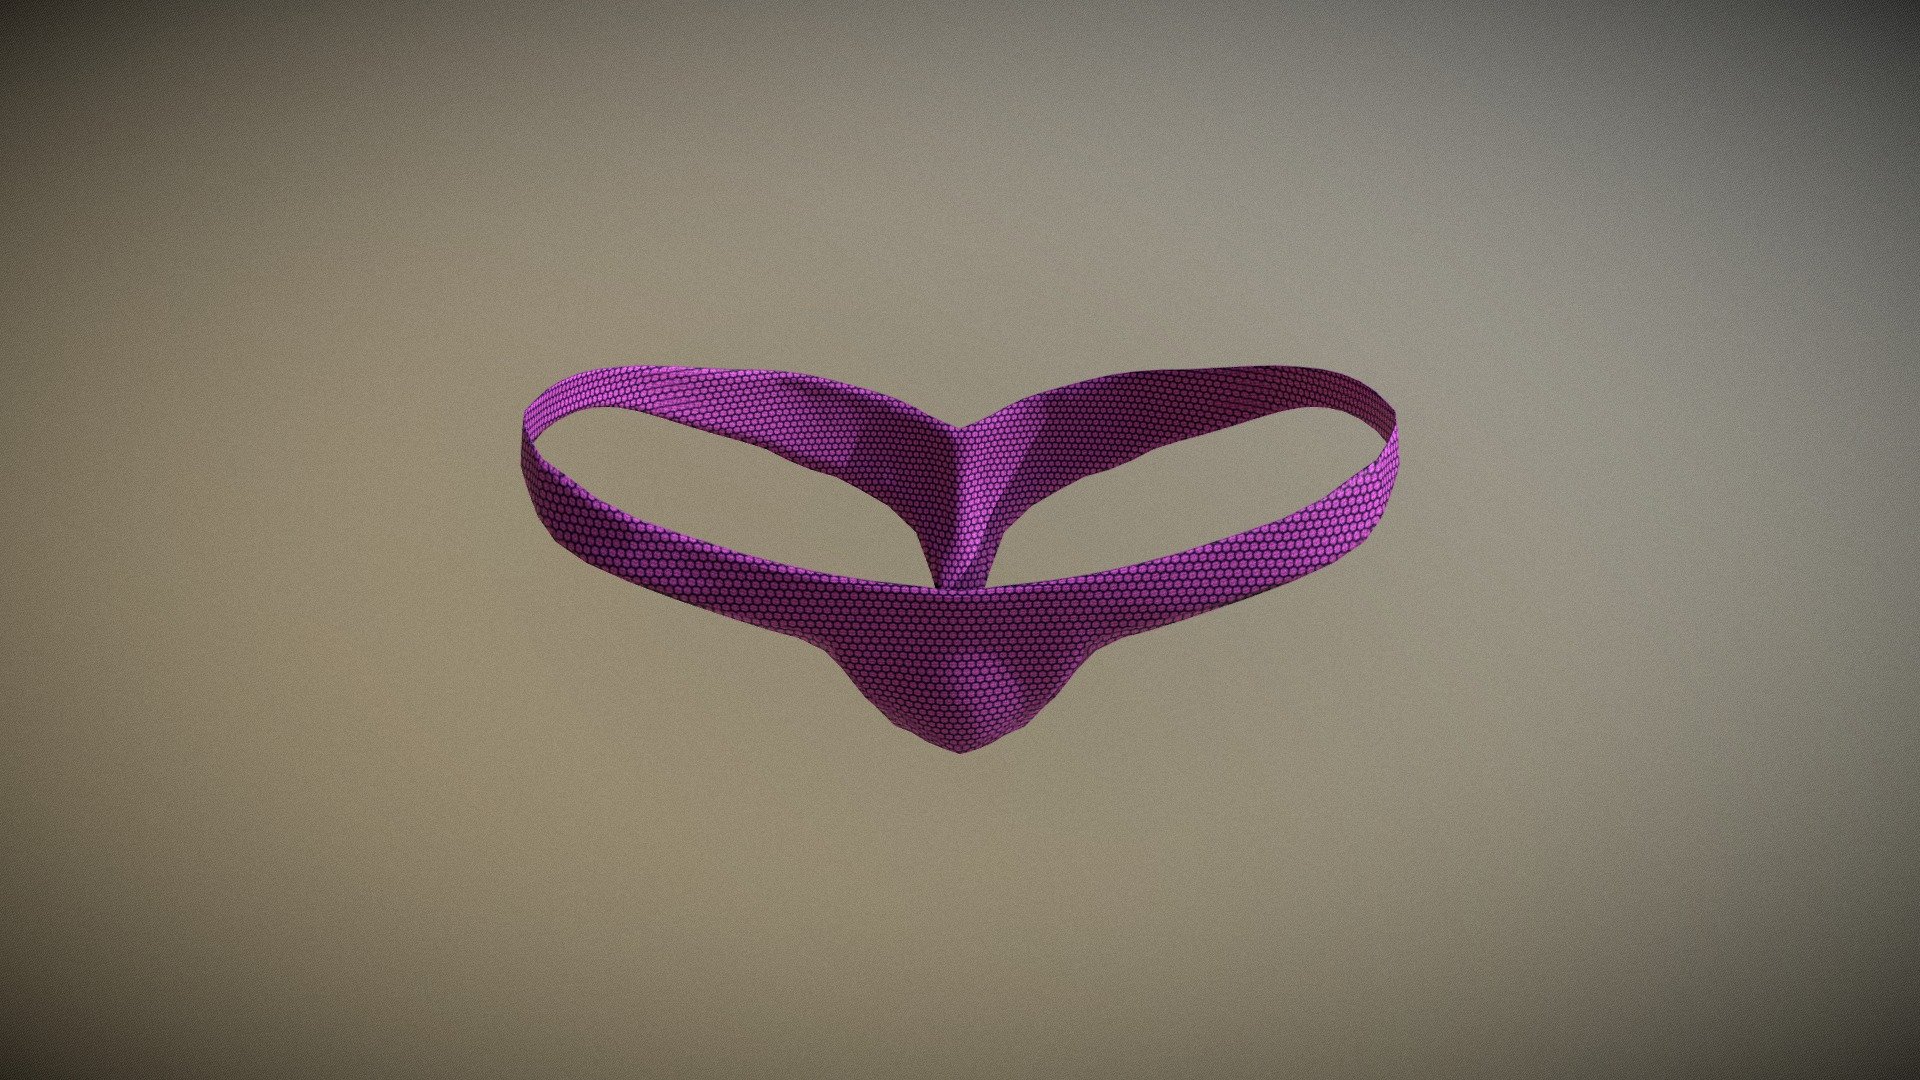 Not really succeeded but a quick test to see if I could make some underwear/swimwear for a female character 3d model